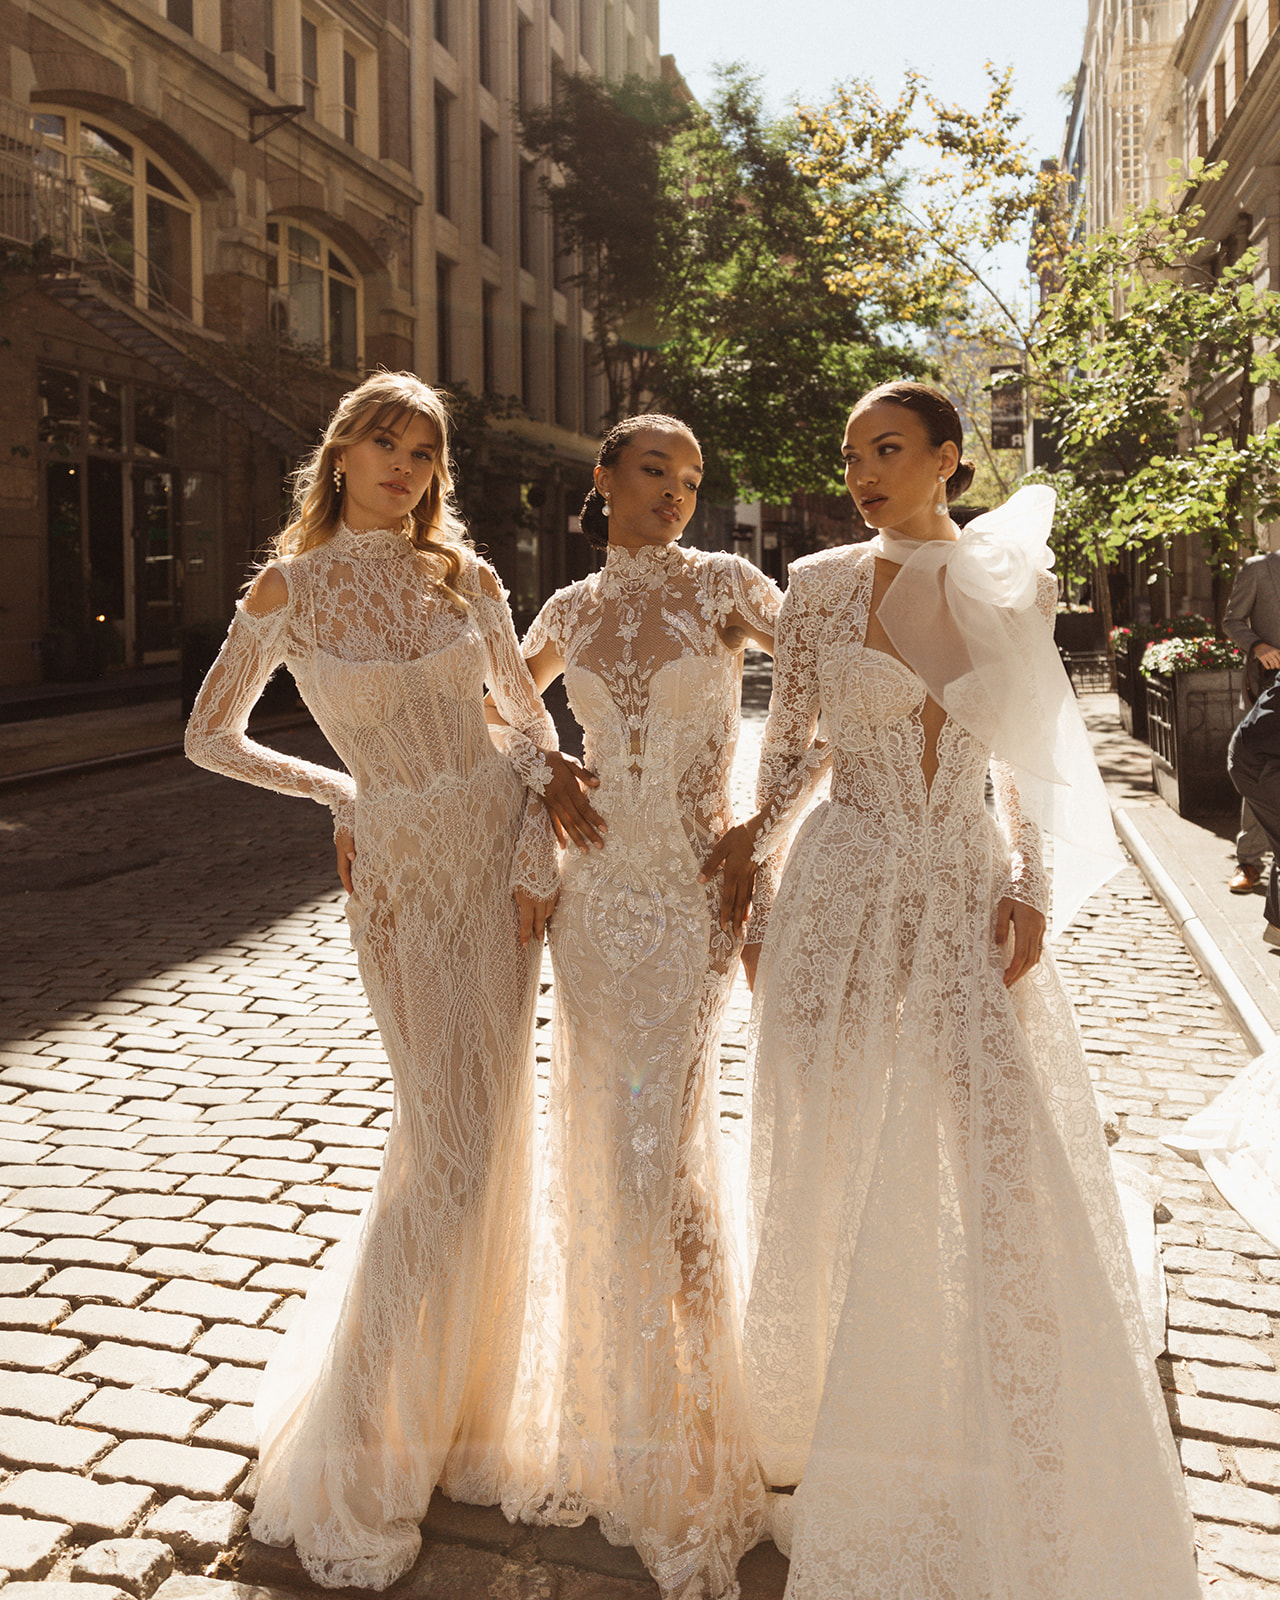 24 Wedding Dresses with Bows: The Latest Bridal Fashion Trend 